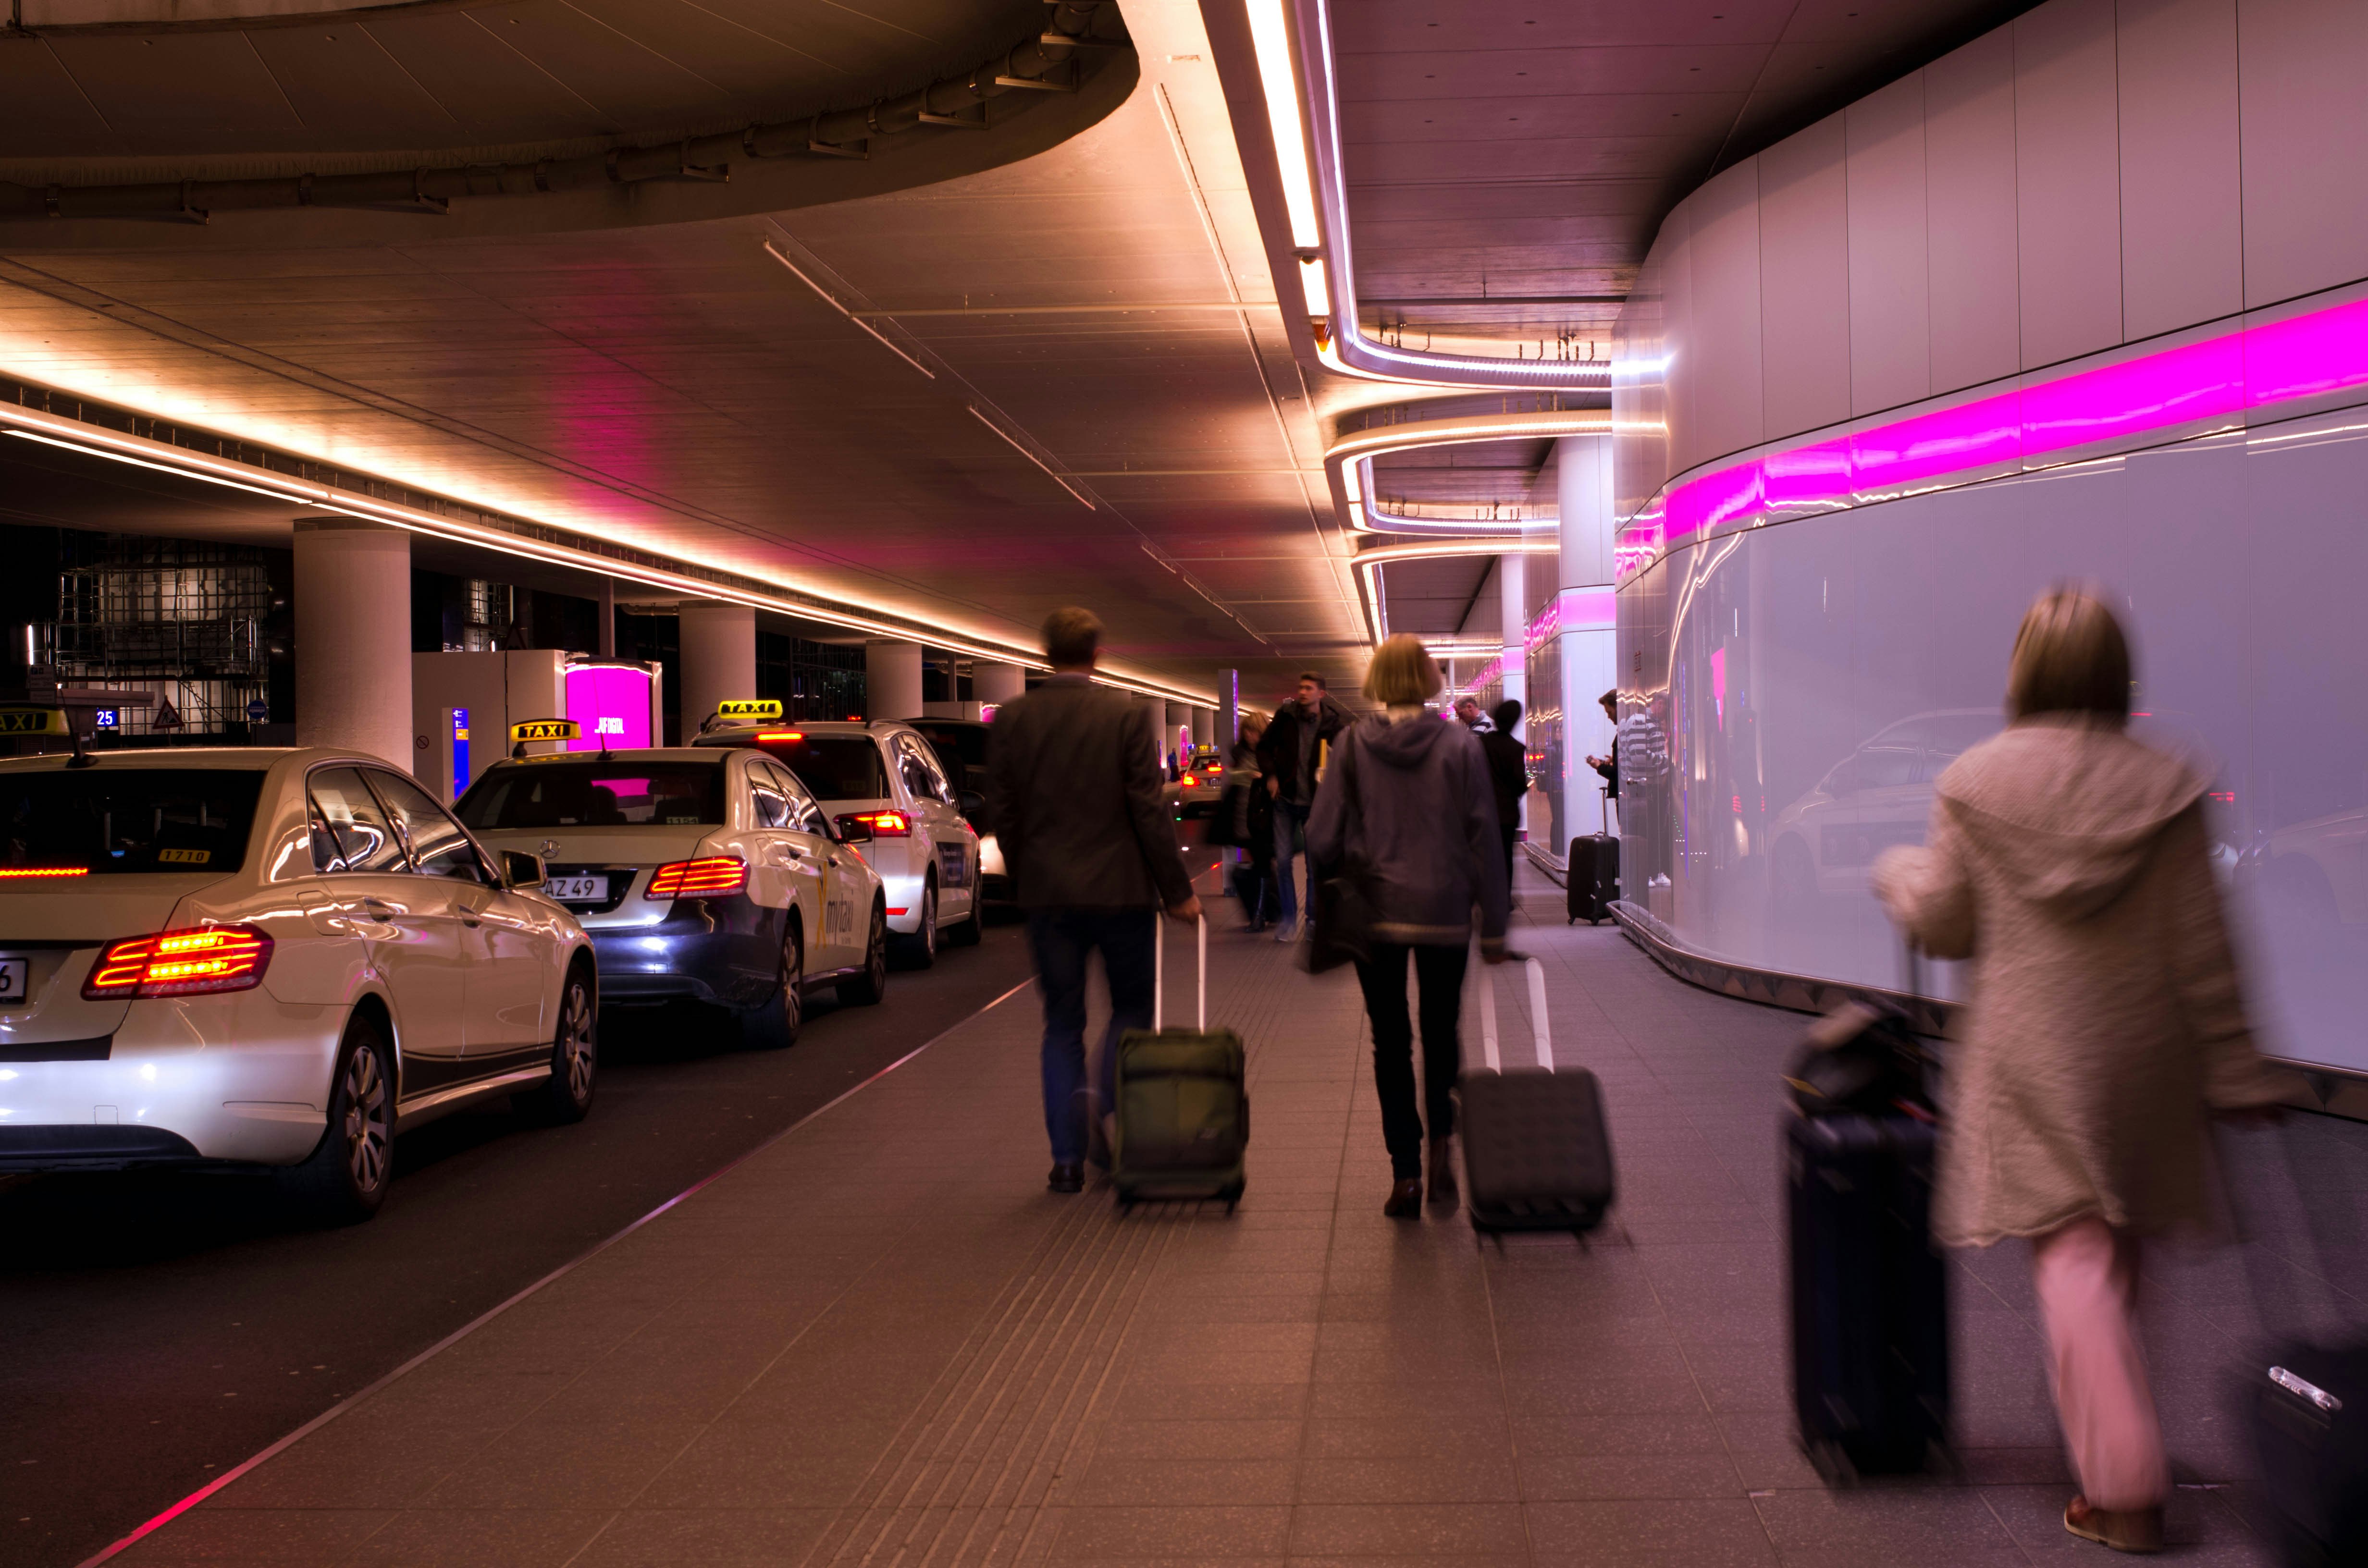 A queue of taxis lined up in an underground taxi rank at an airport; a stream of arriving passengers with suitcases are walking towards to head of the queue.